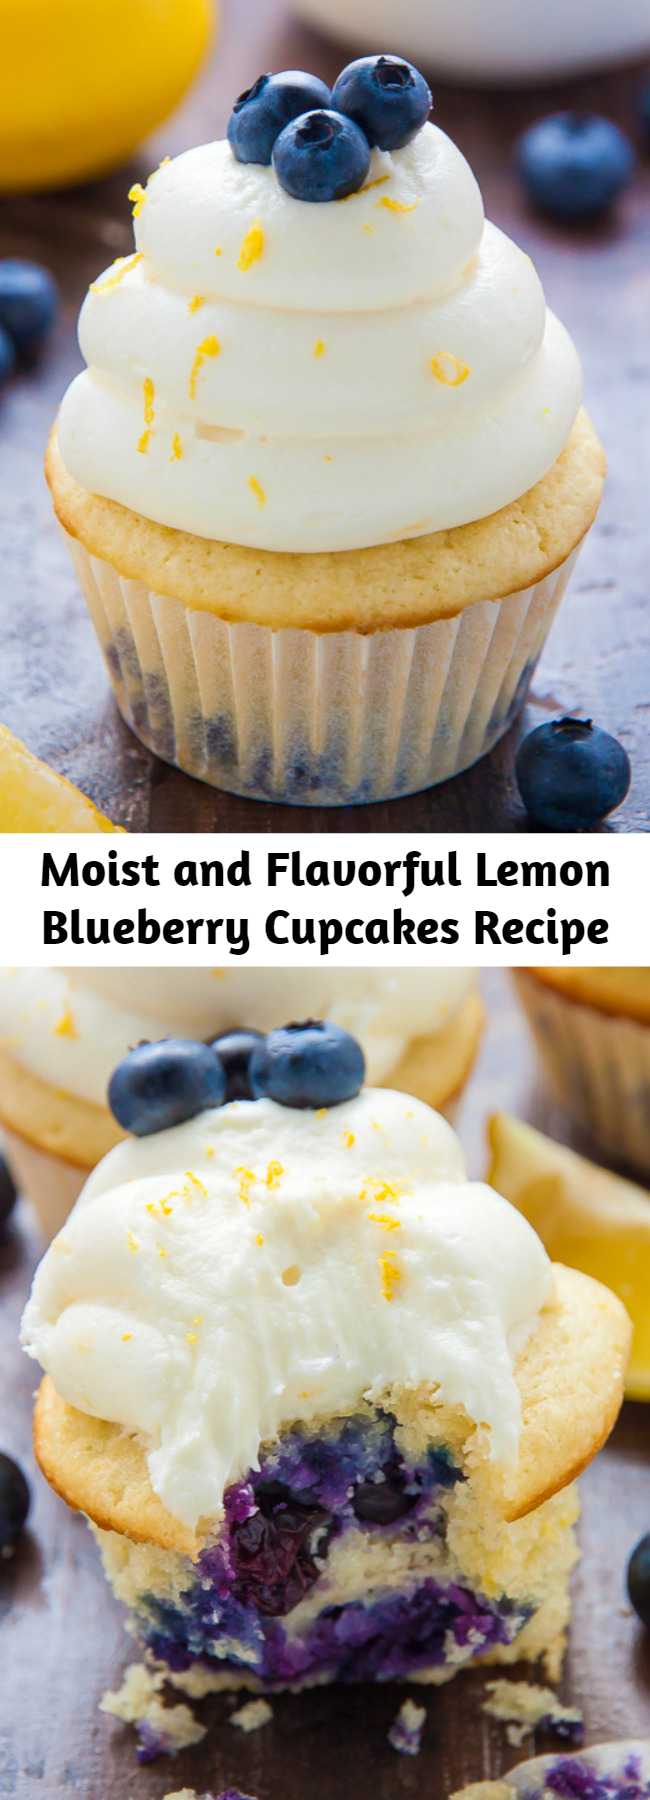 Homemade Lemon Blueberry Cupcakes are topped with luscious Lemon Cream Cheese Frosting and Fresh Blueberries! The moist lemon cupcakes are so flavorful and bursting with juicy blueberries. This recipe is such a crowd-pleaser and perfect for Summer birthday parties, picnics, or barbecues!